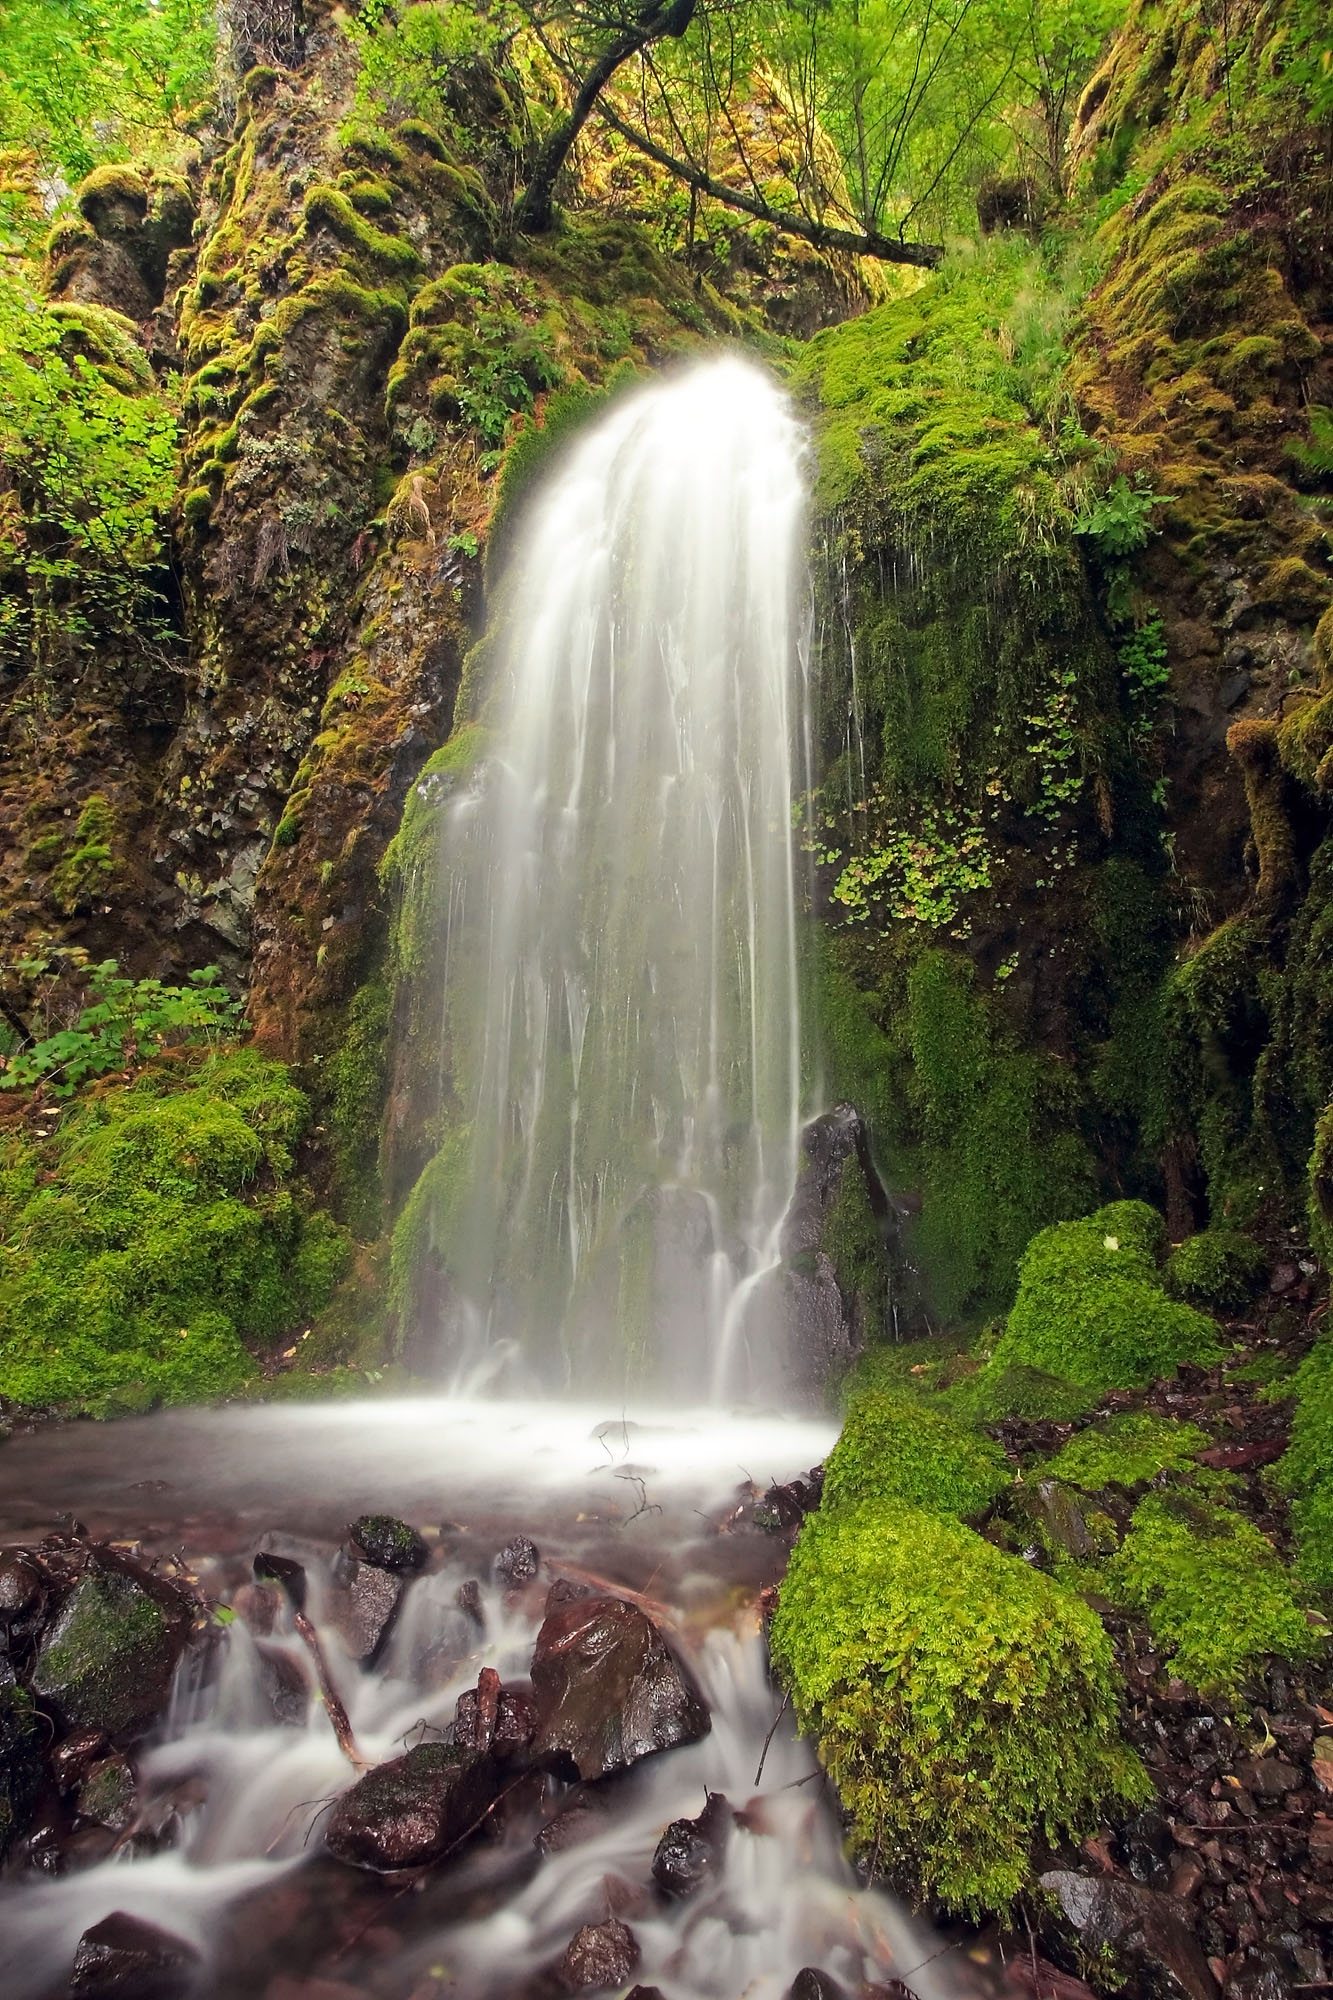 Lancaster Falls is a fairytale-like, moss-covered cascade in Warren Creek in the Columbia River Gorge in Oregon